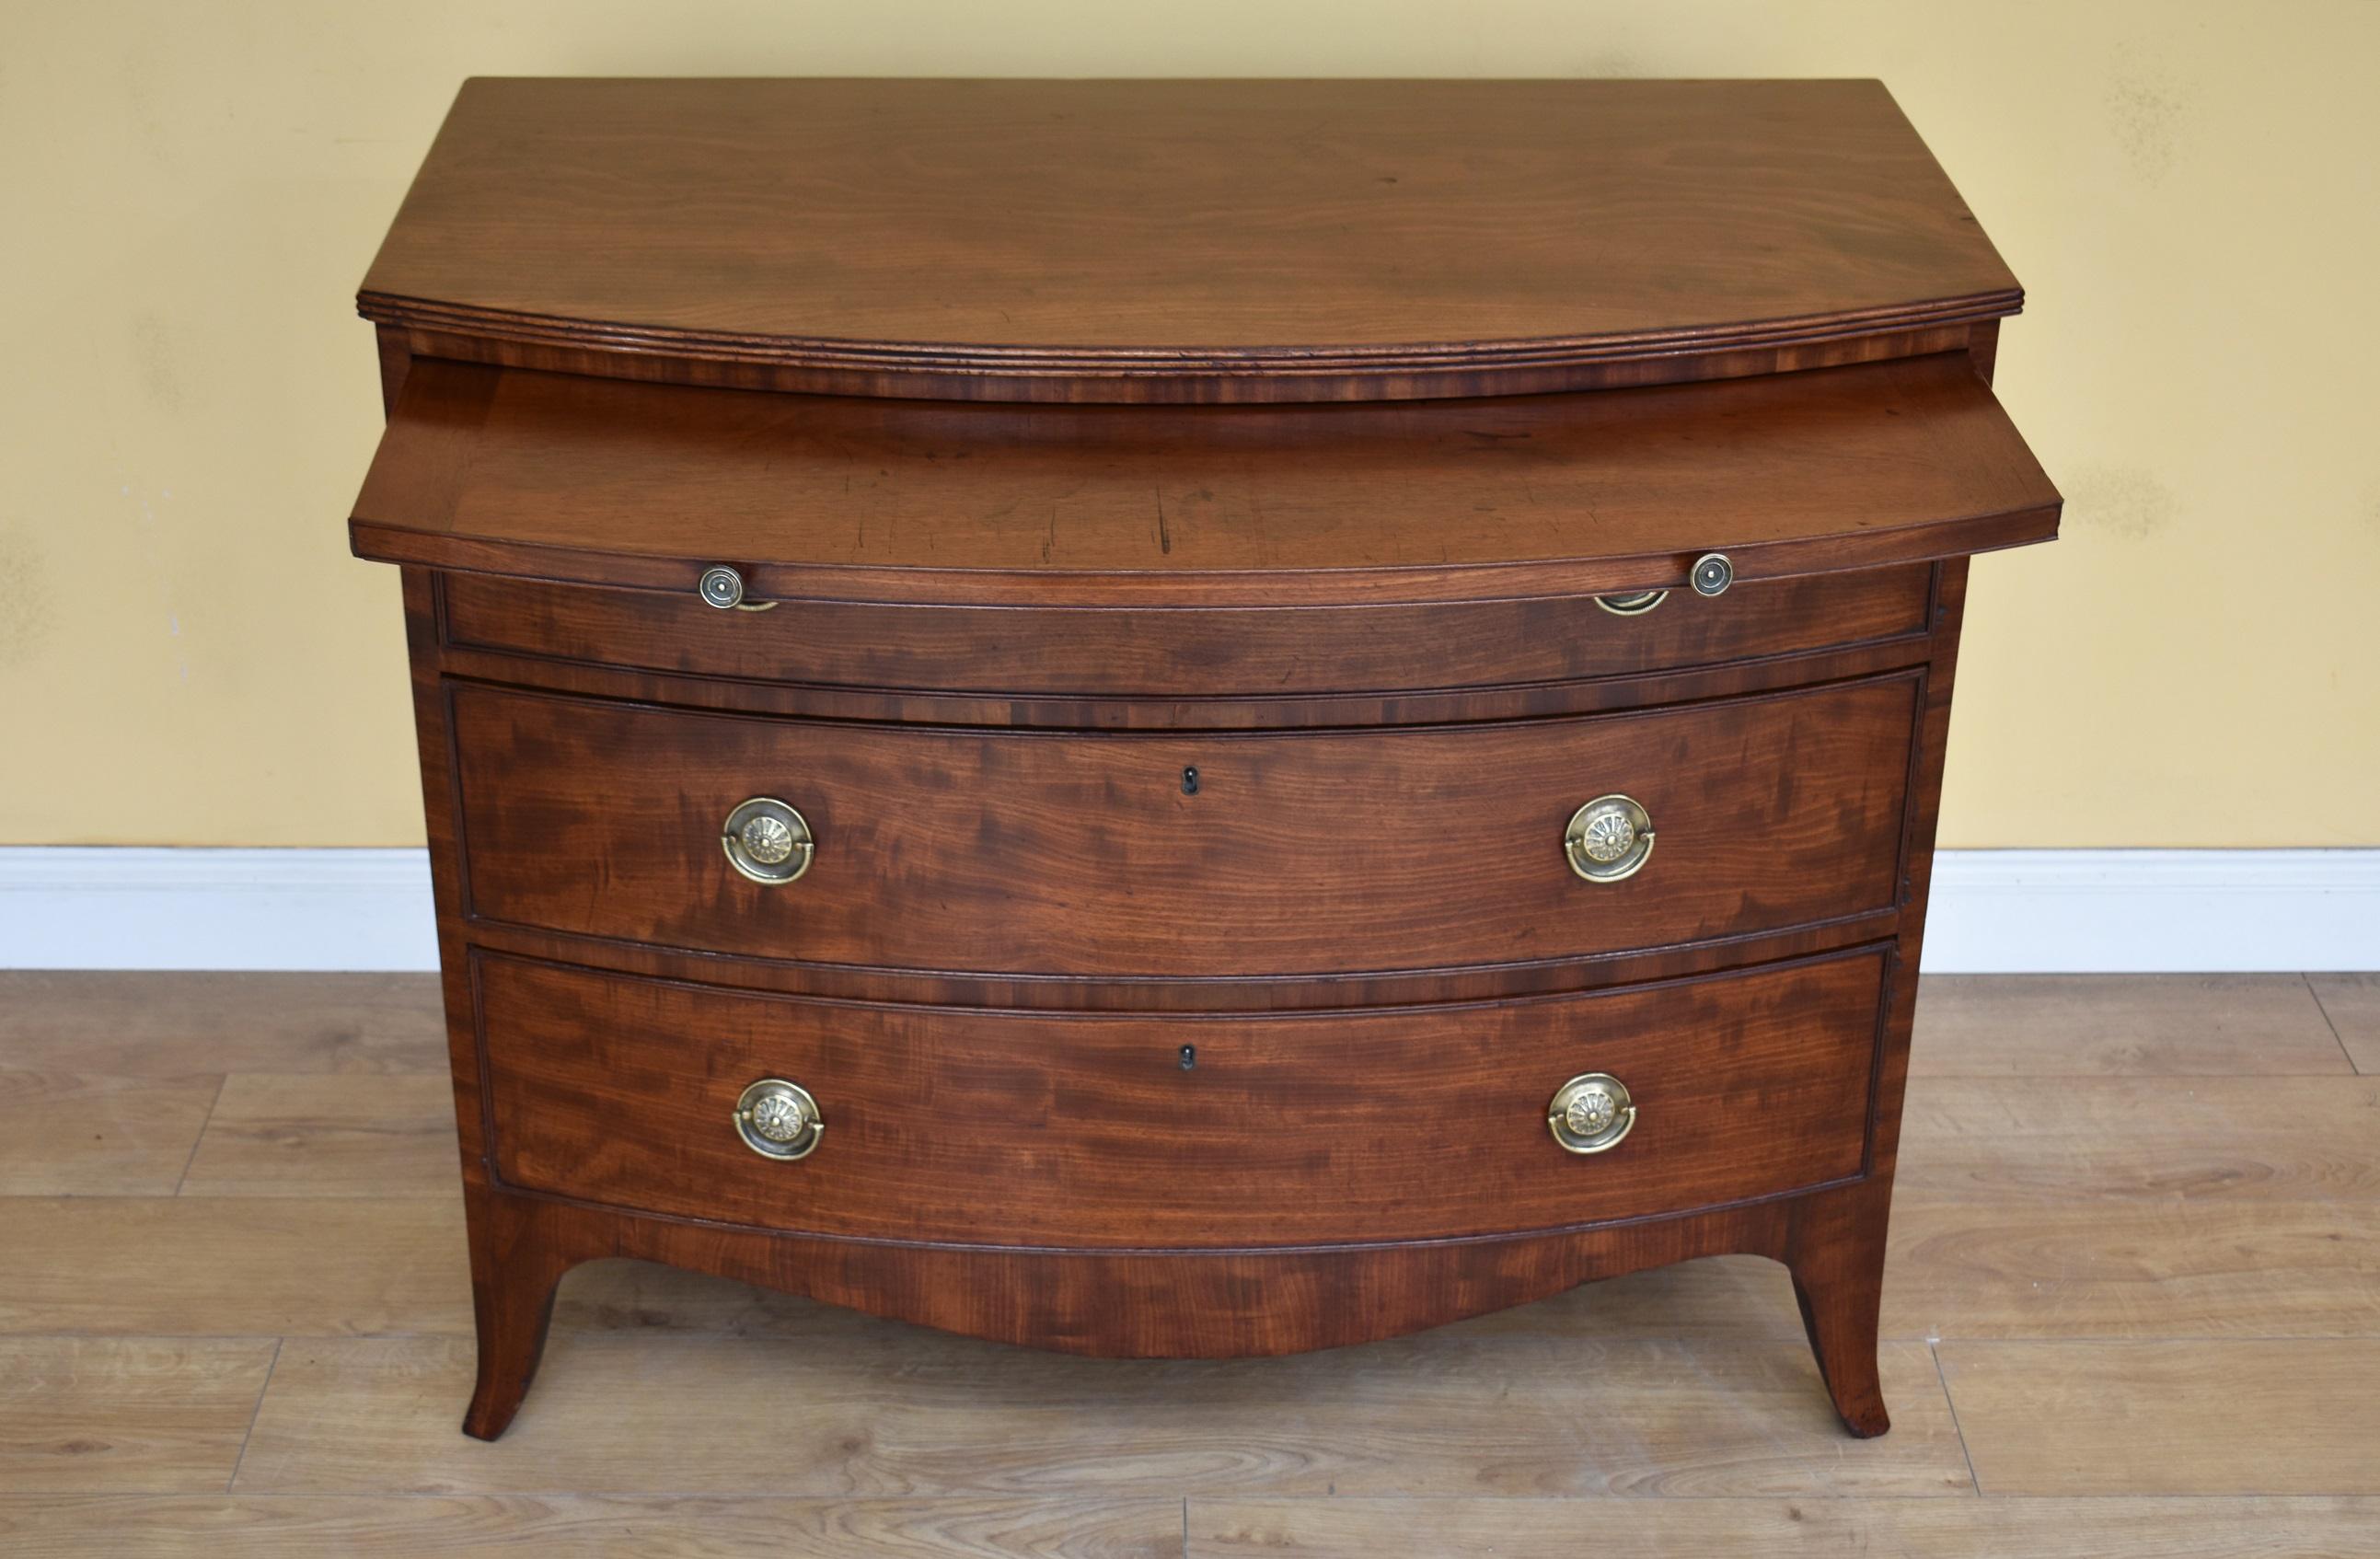 European 19th Century English Regency Period Mahogany Bow Front Chest of Drawers